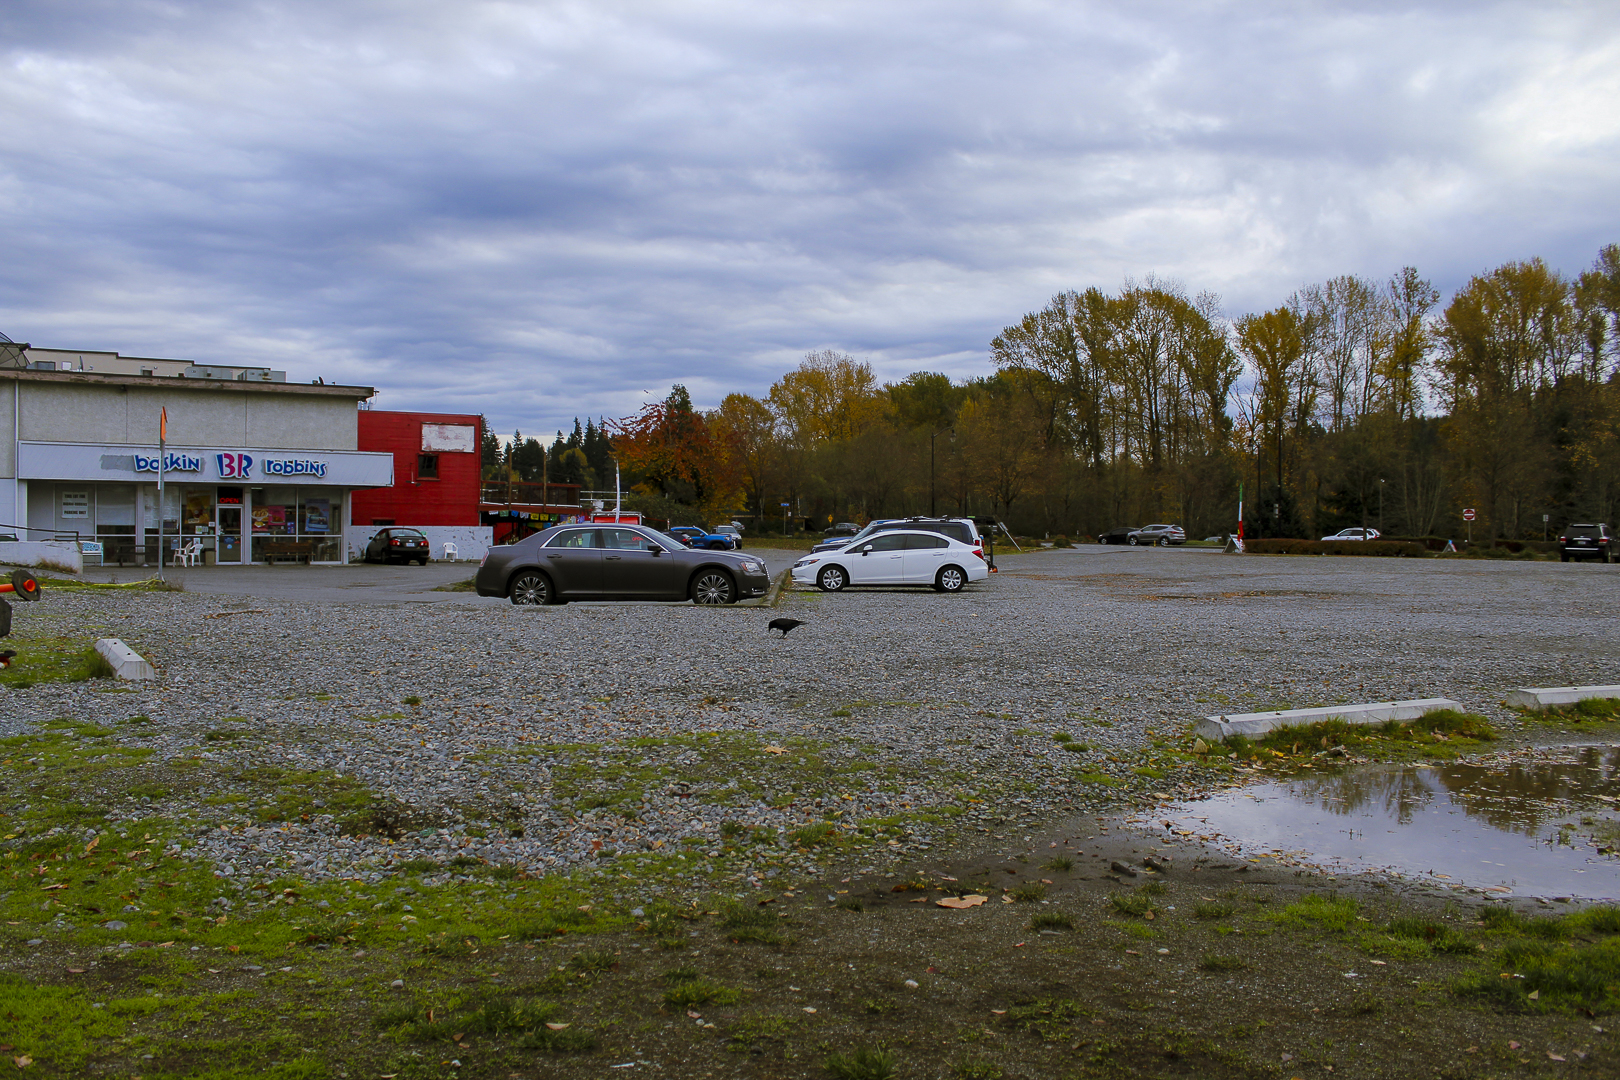 Lot EFG, currently a parking lot in front of Baskin Robbins in Bothell, will be redeveloped in the next several years.